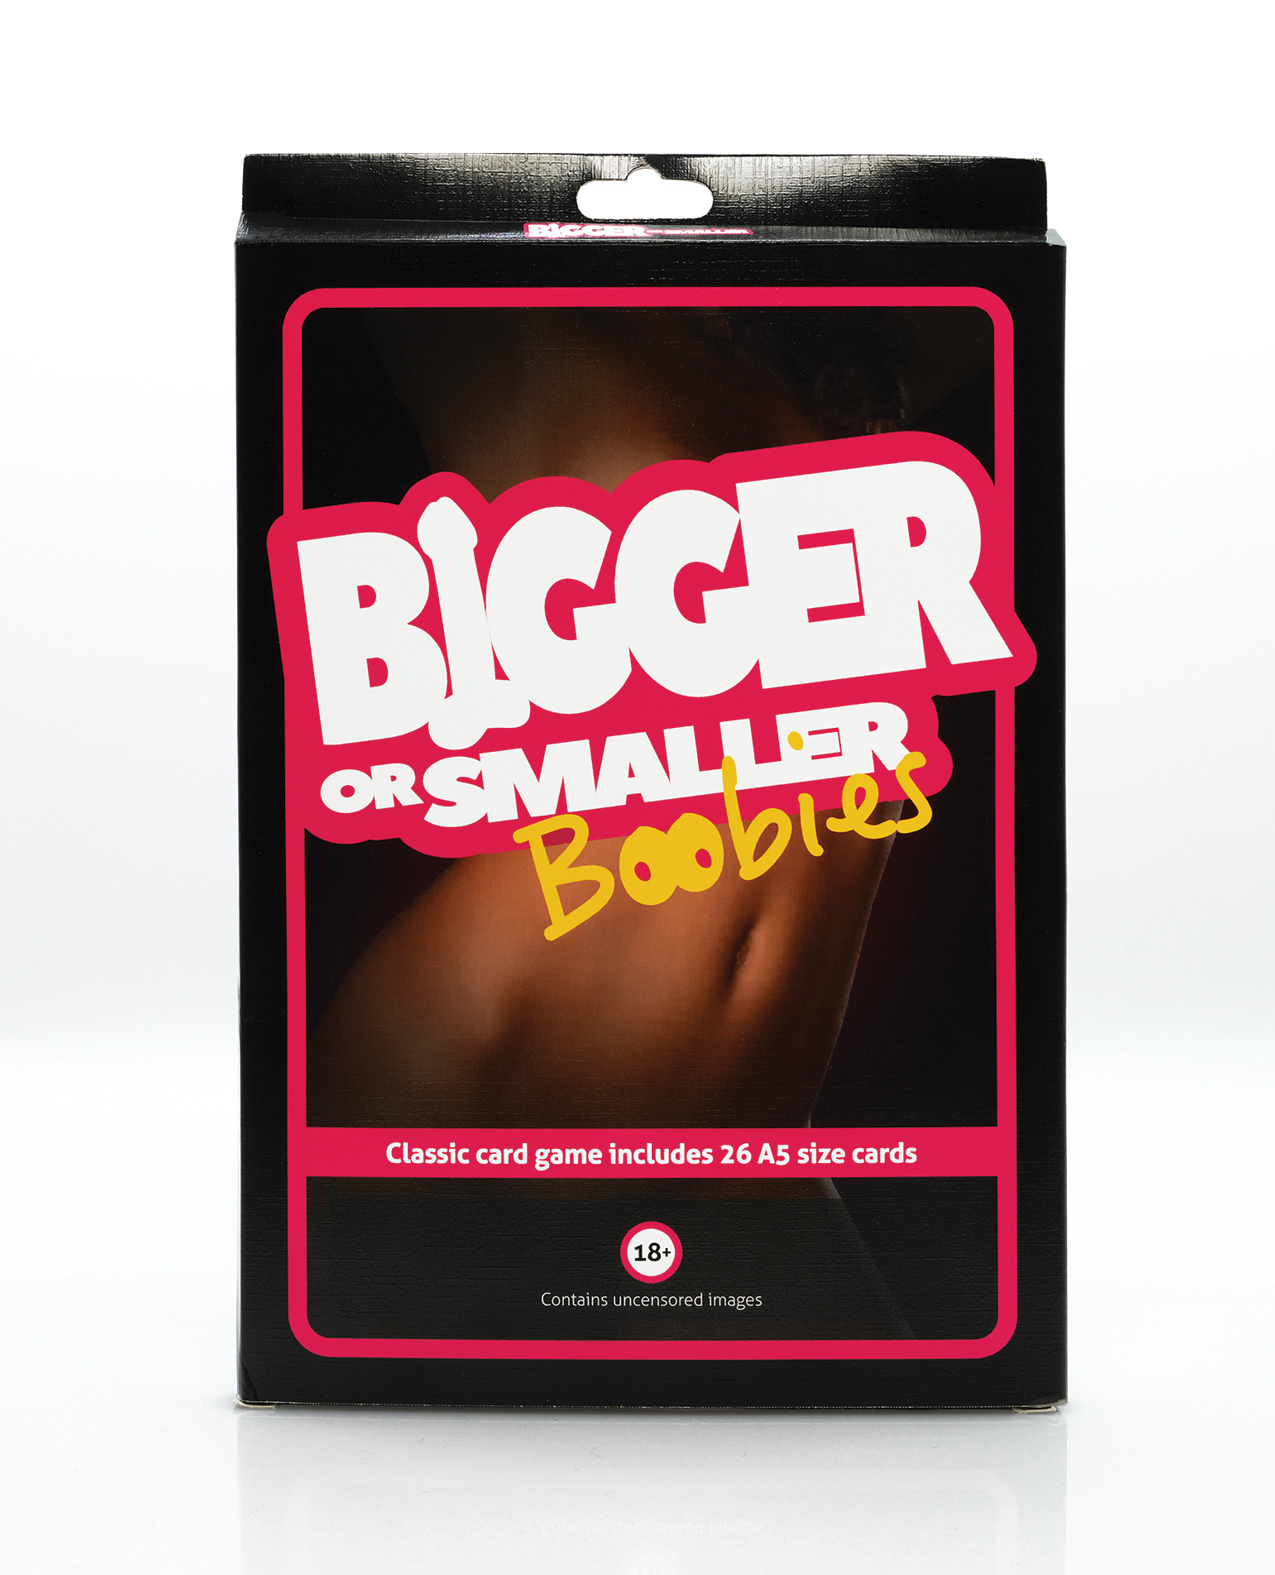 A pack of cards in a box that says "Bigger or Smaller Boobies"